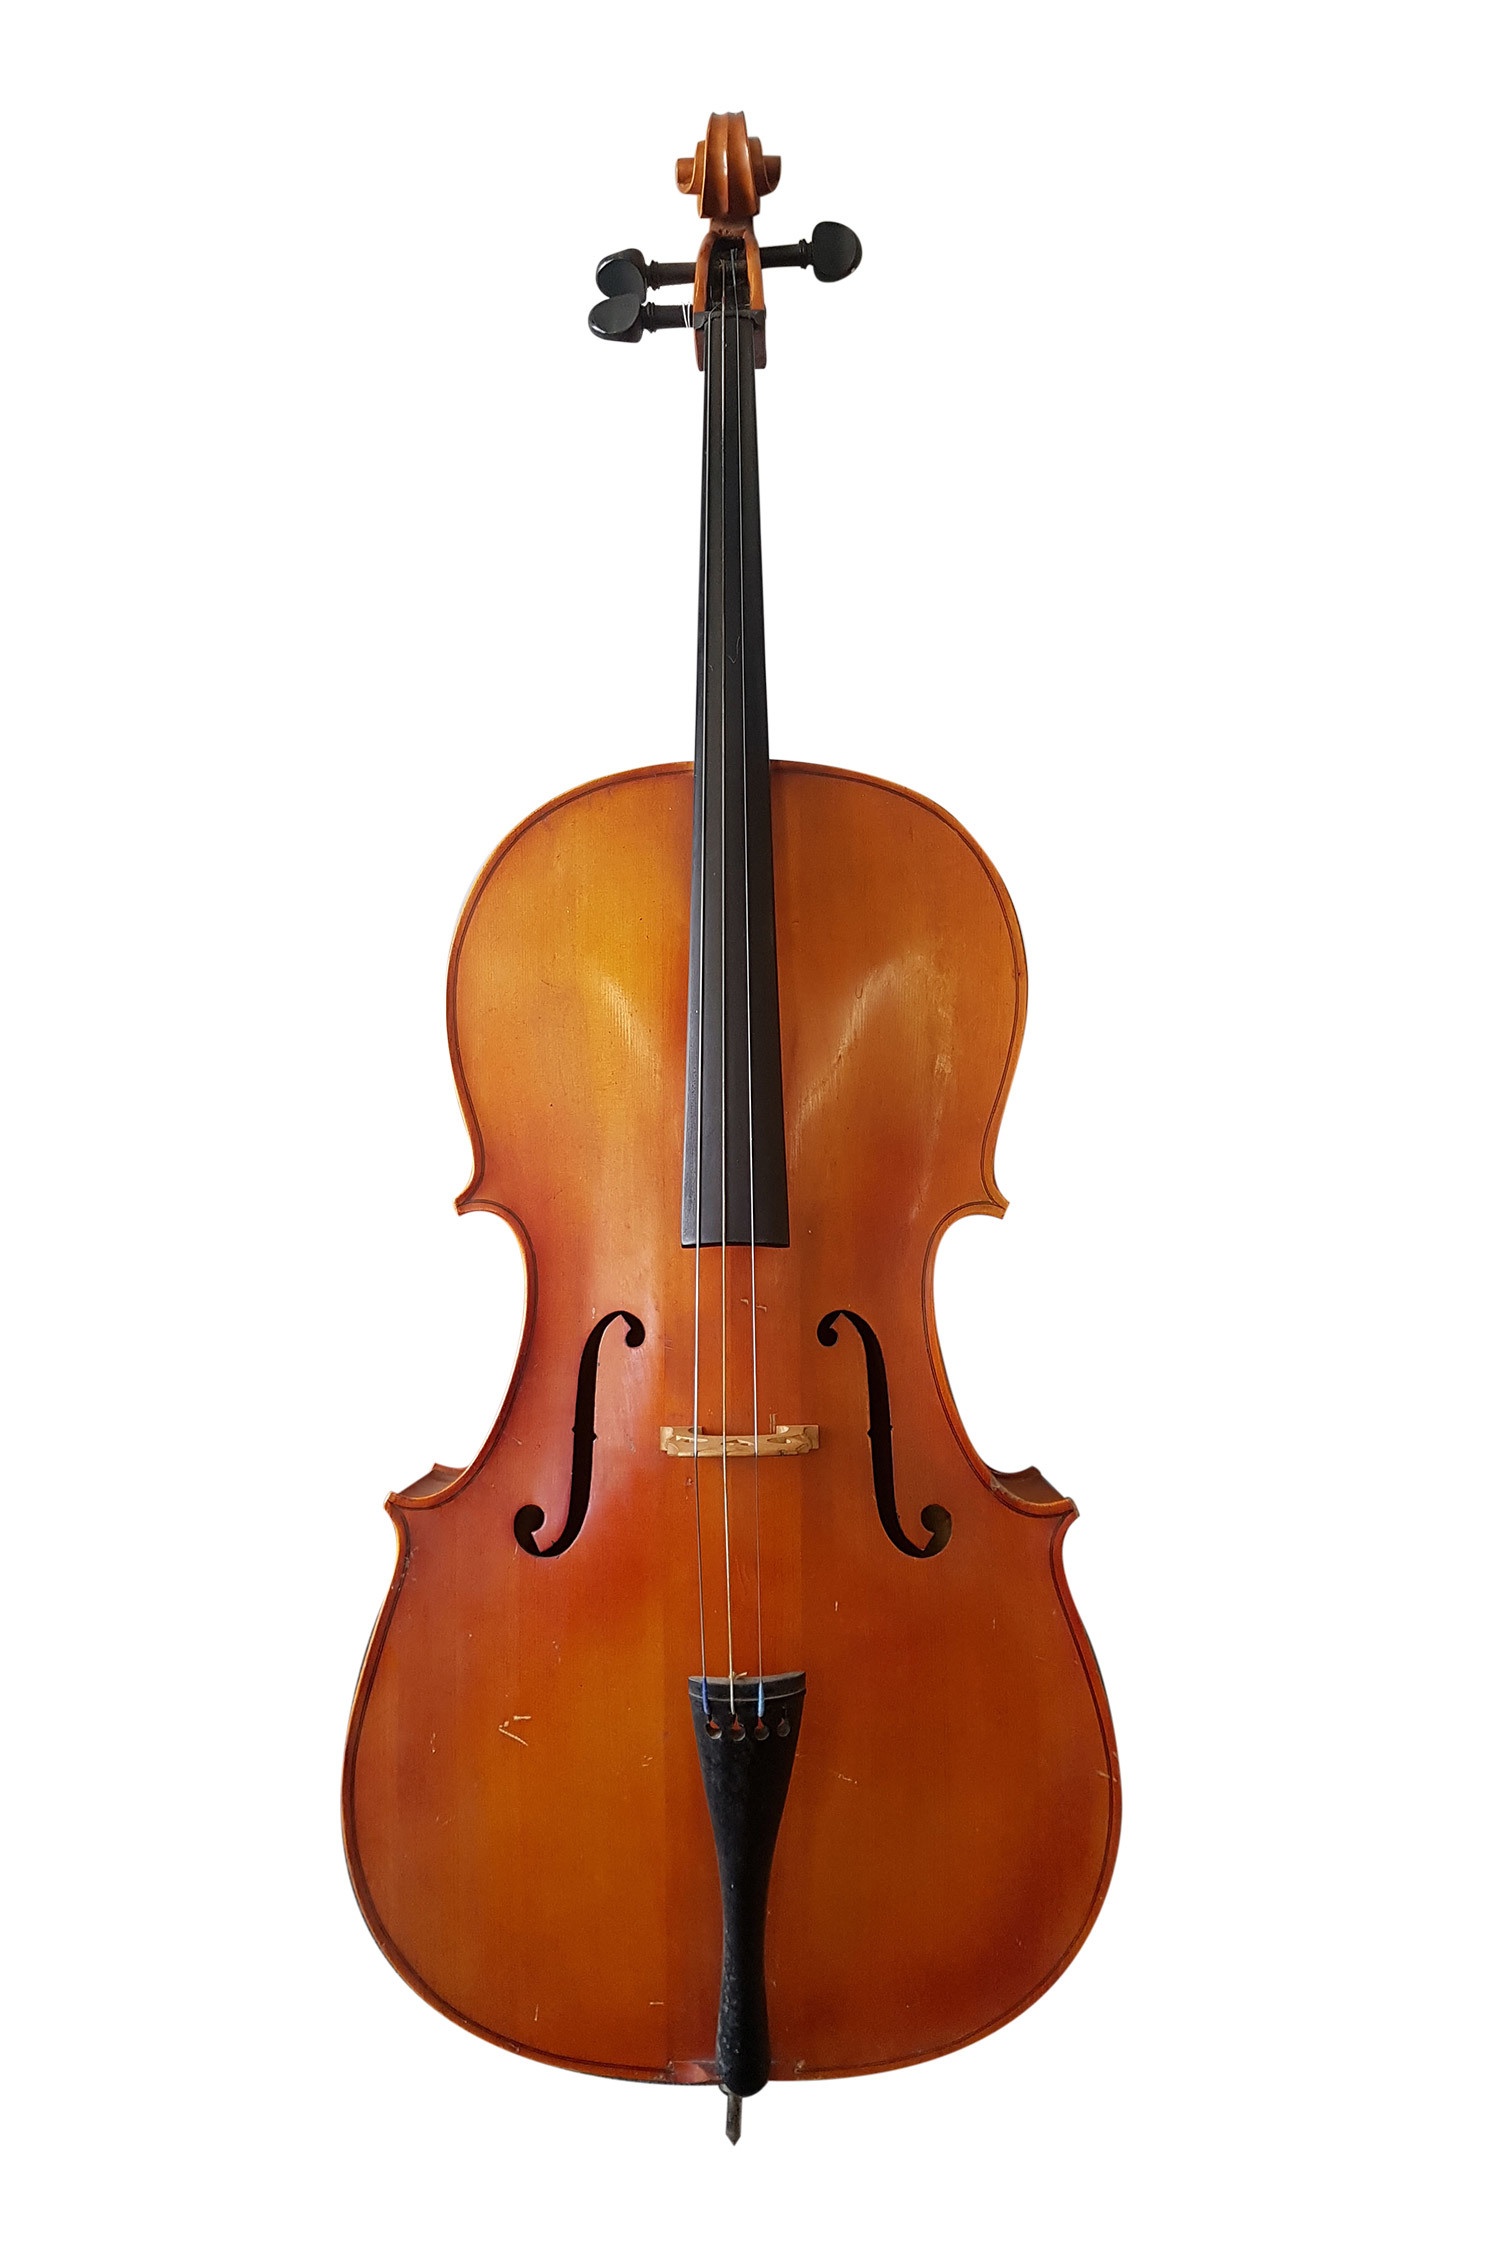 Lot 12 A Modern Cello  8th to 21st May 2022 Auction